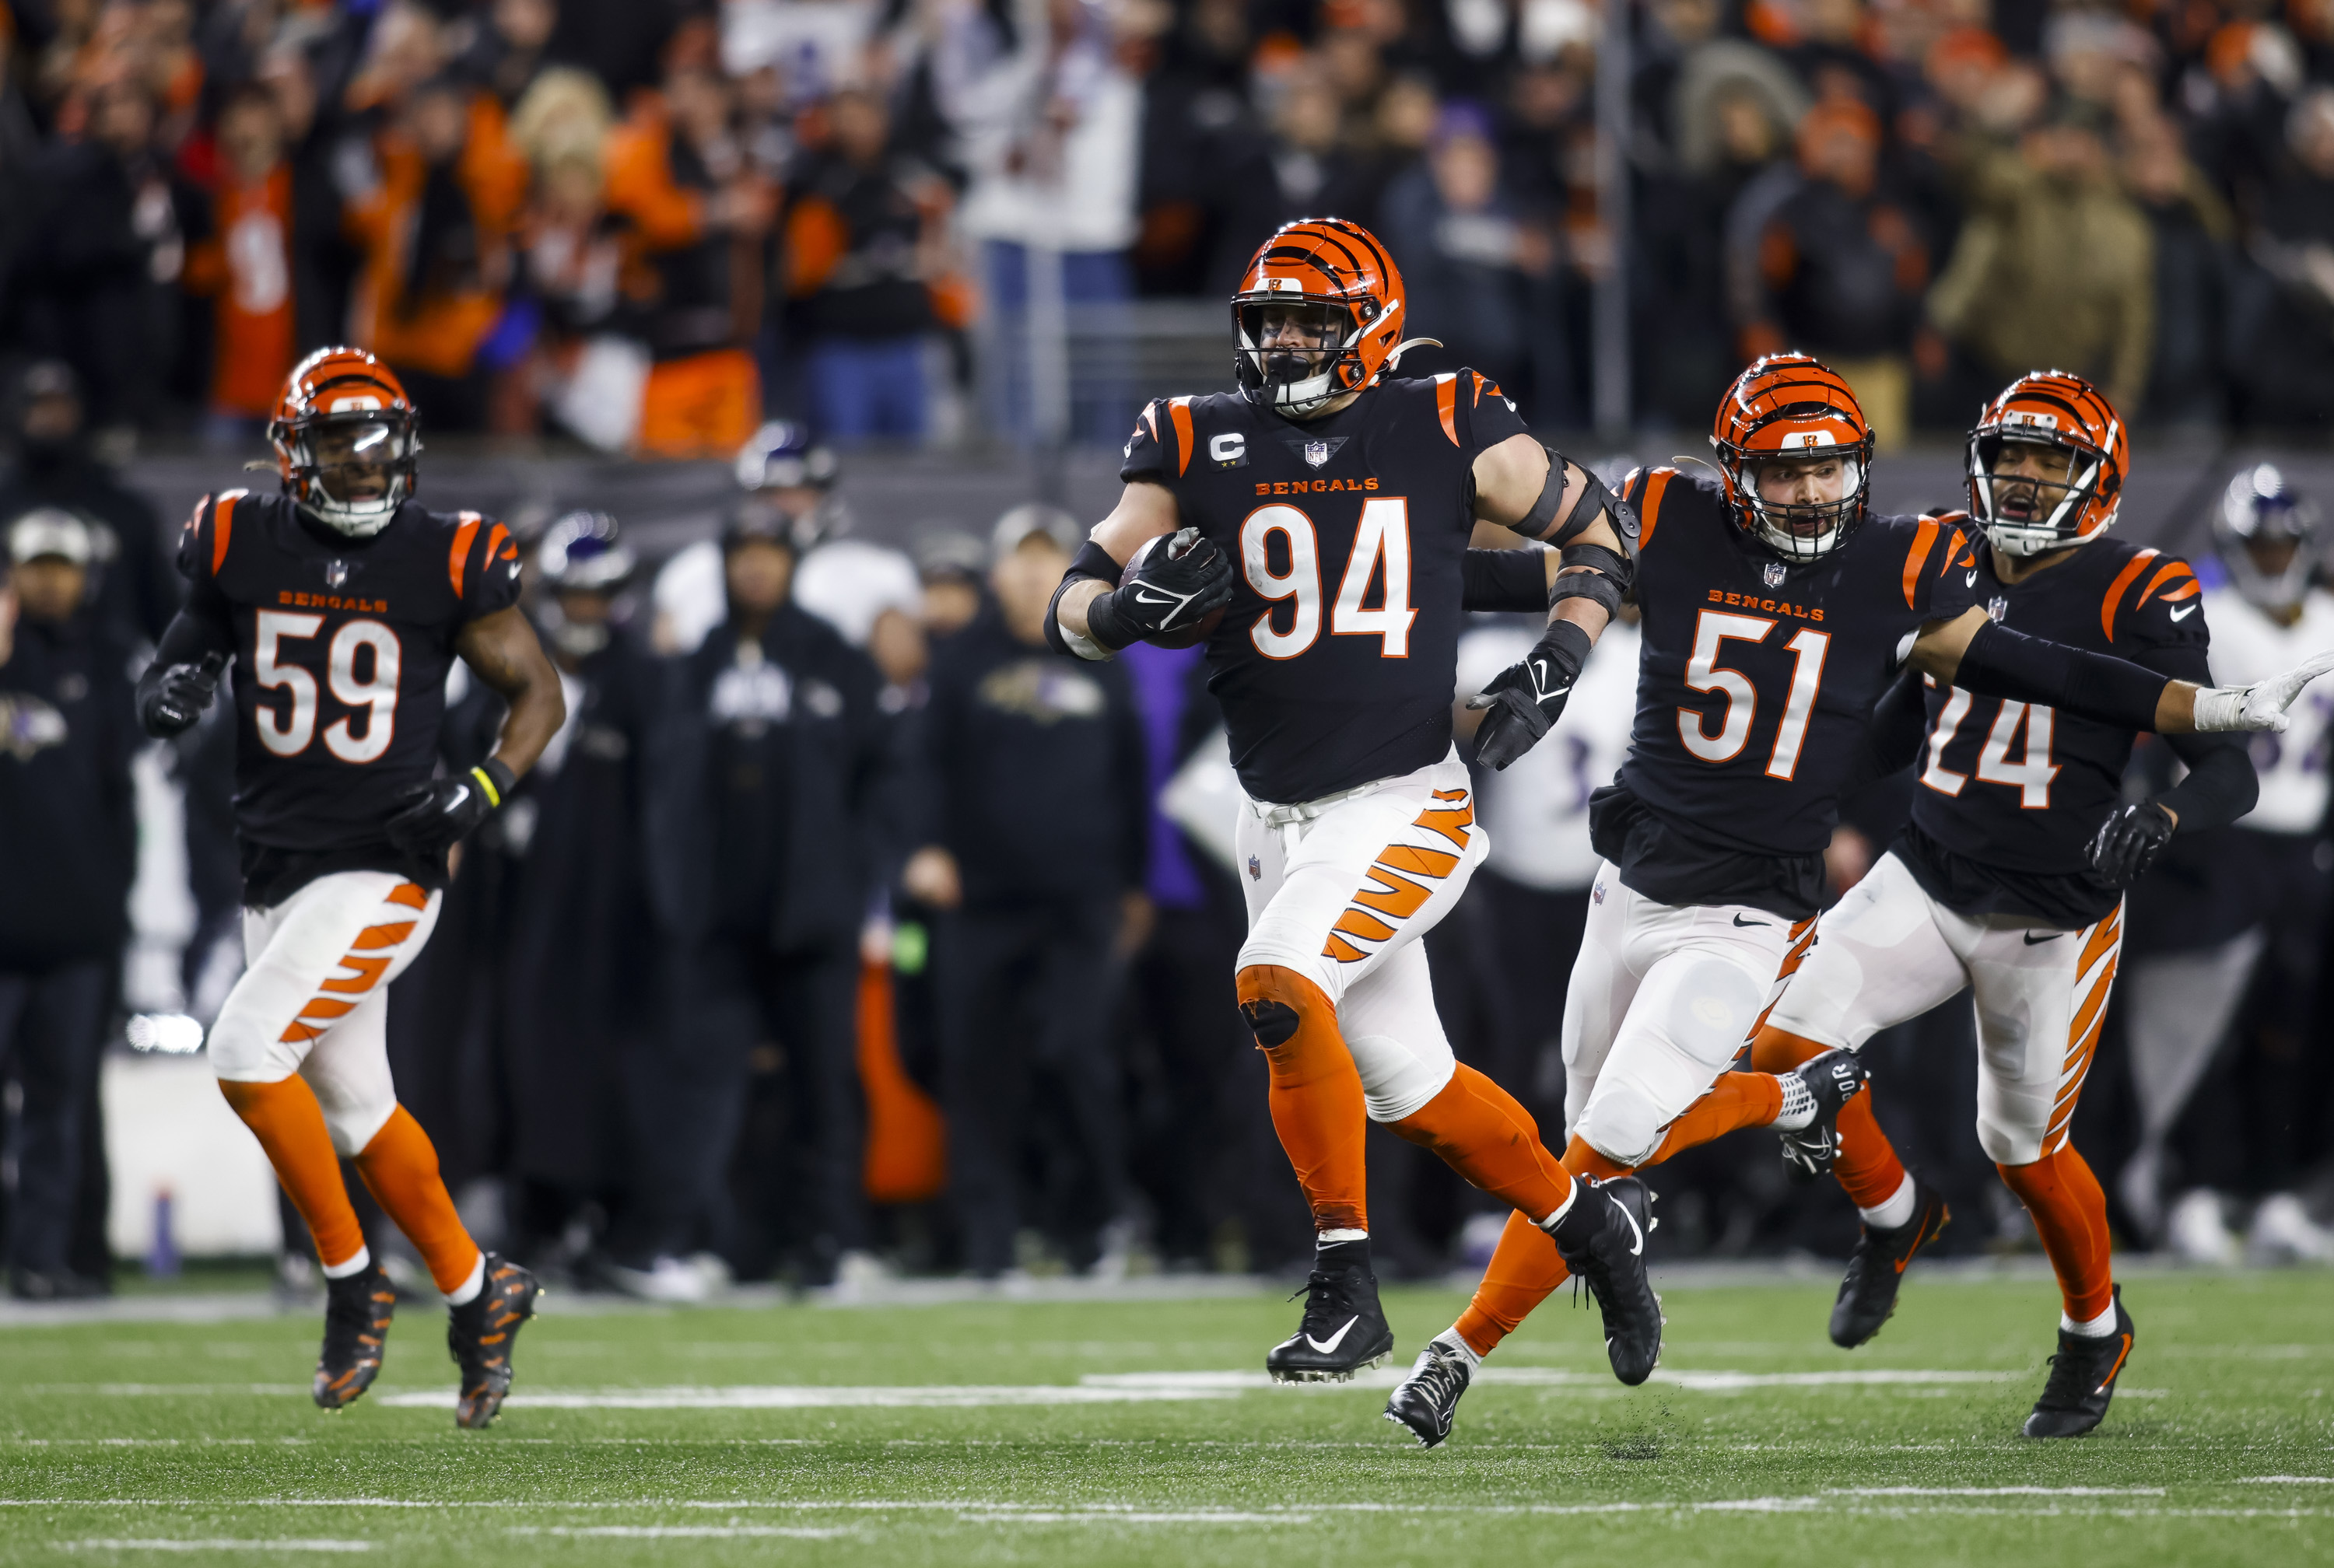 Archdeacon: 'Mr. Cincinnati' the man of the moment for Bengals